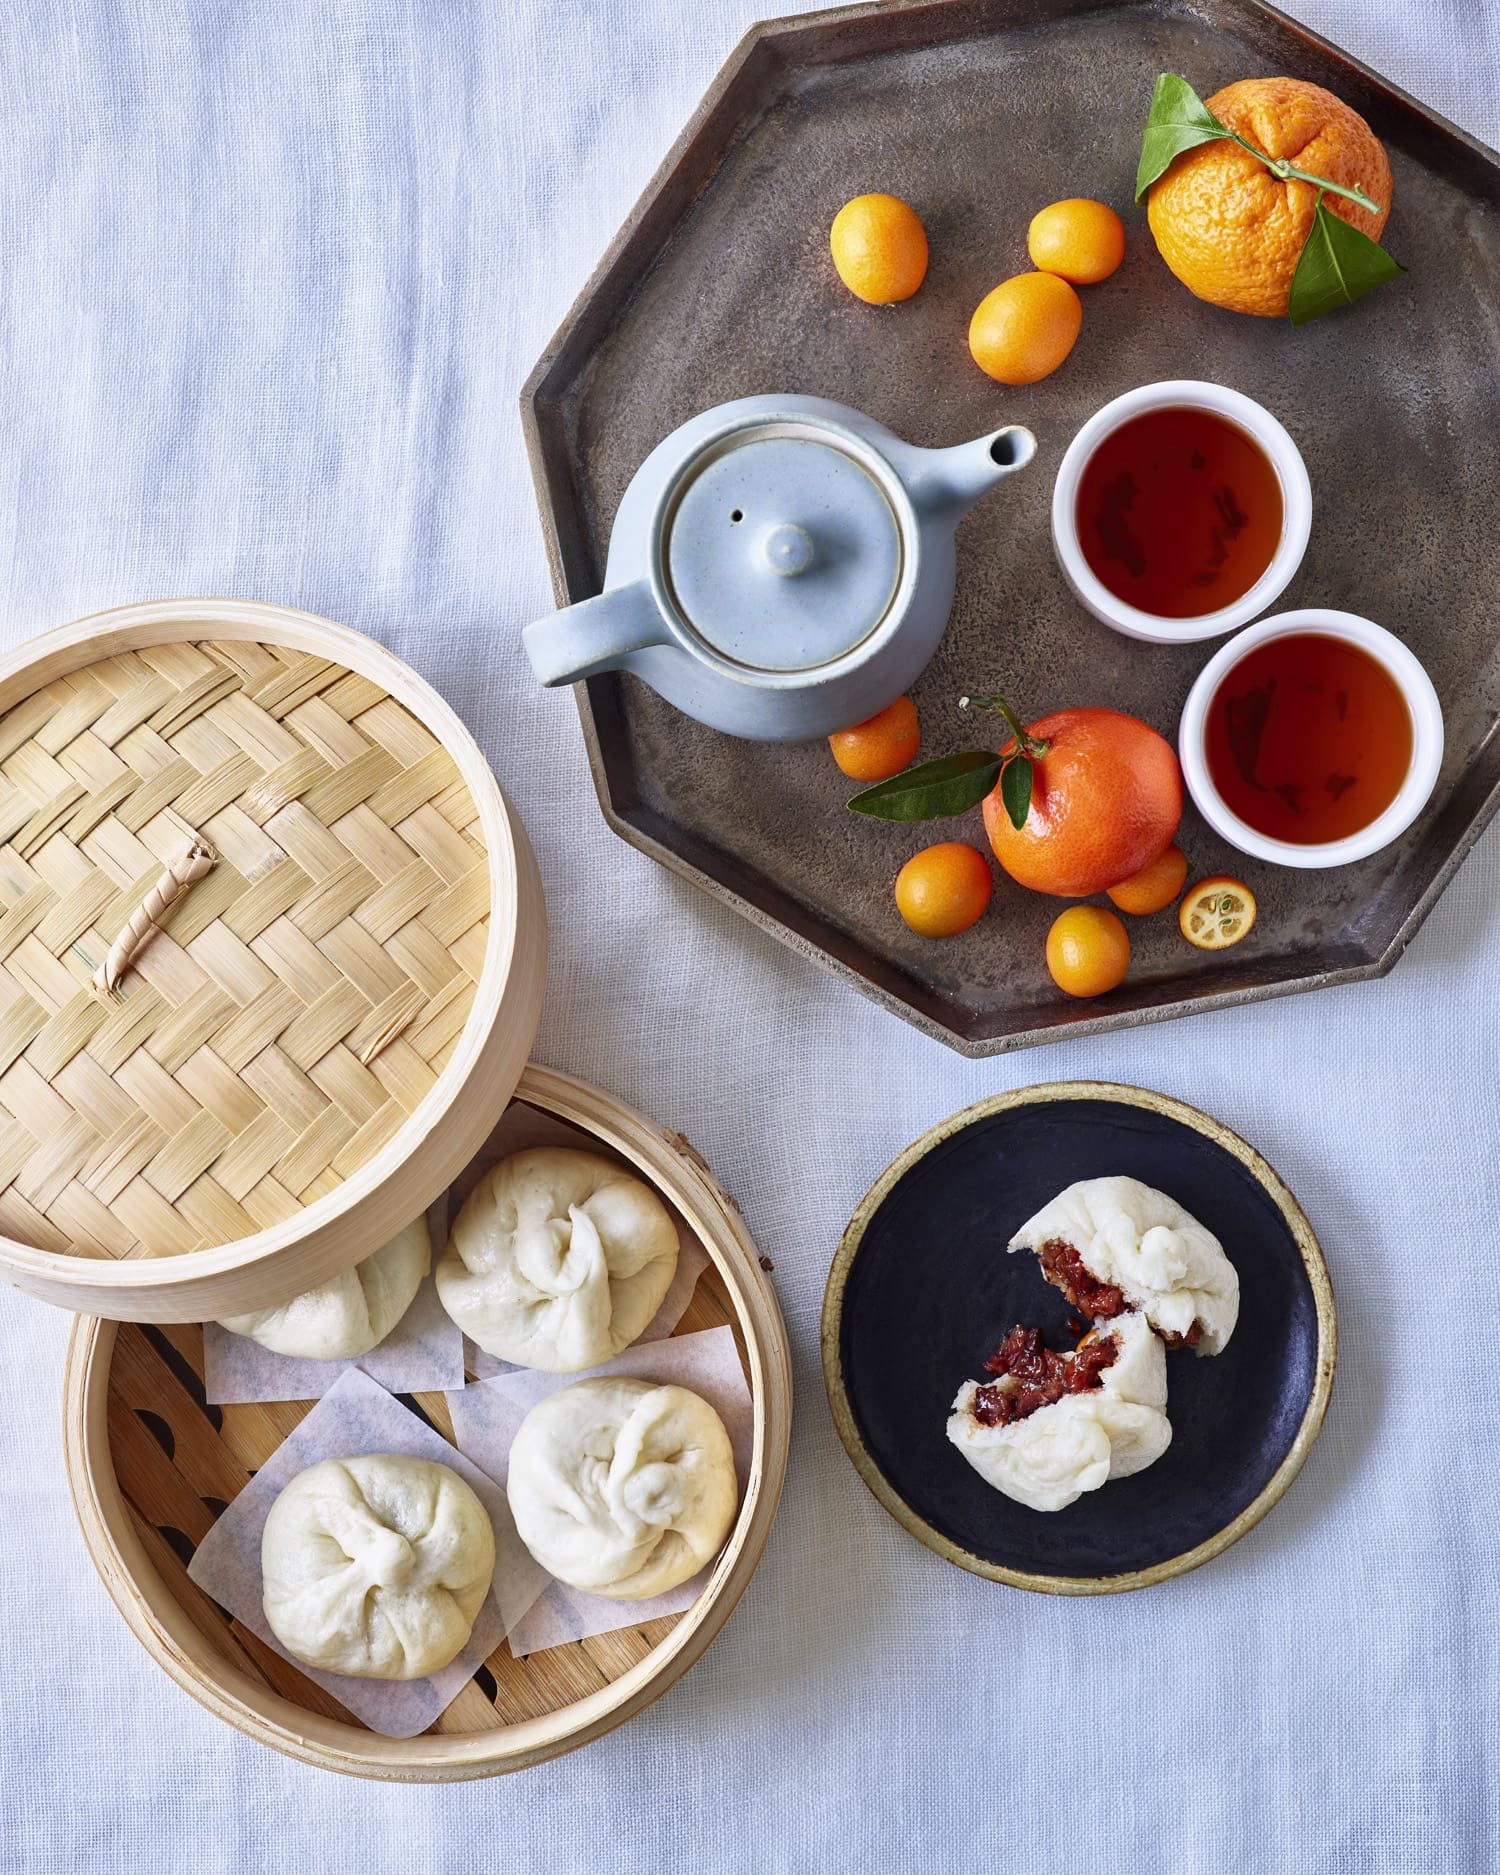 Chinese Steamed Pork Buns Are Pure Comfort To Me. Here's How I Make Them at Home.